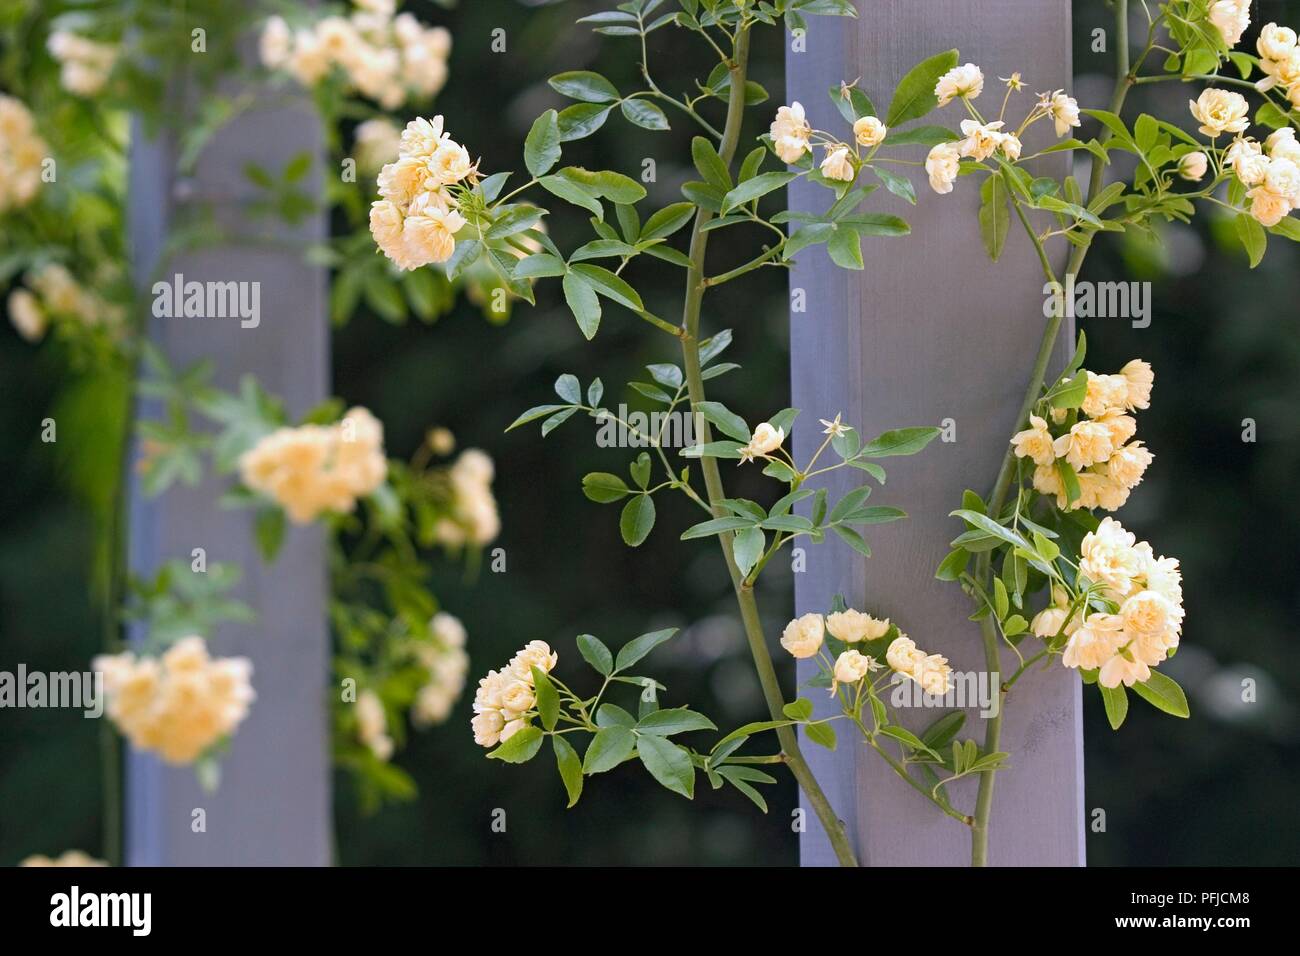 Rosa banksiae 'Lutea' (Lady Banks' rose), cream coloured flowers growing around wooden post Stock Photo